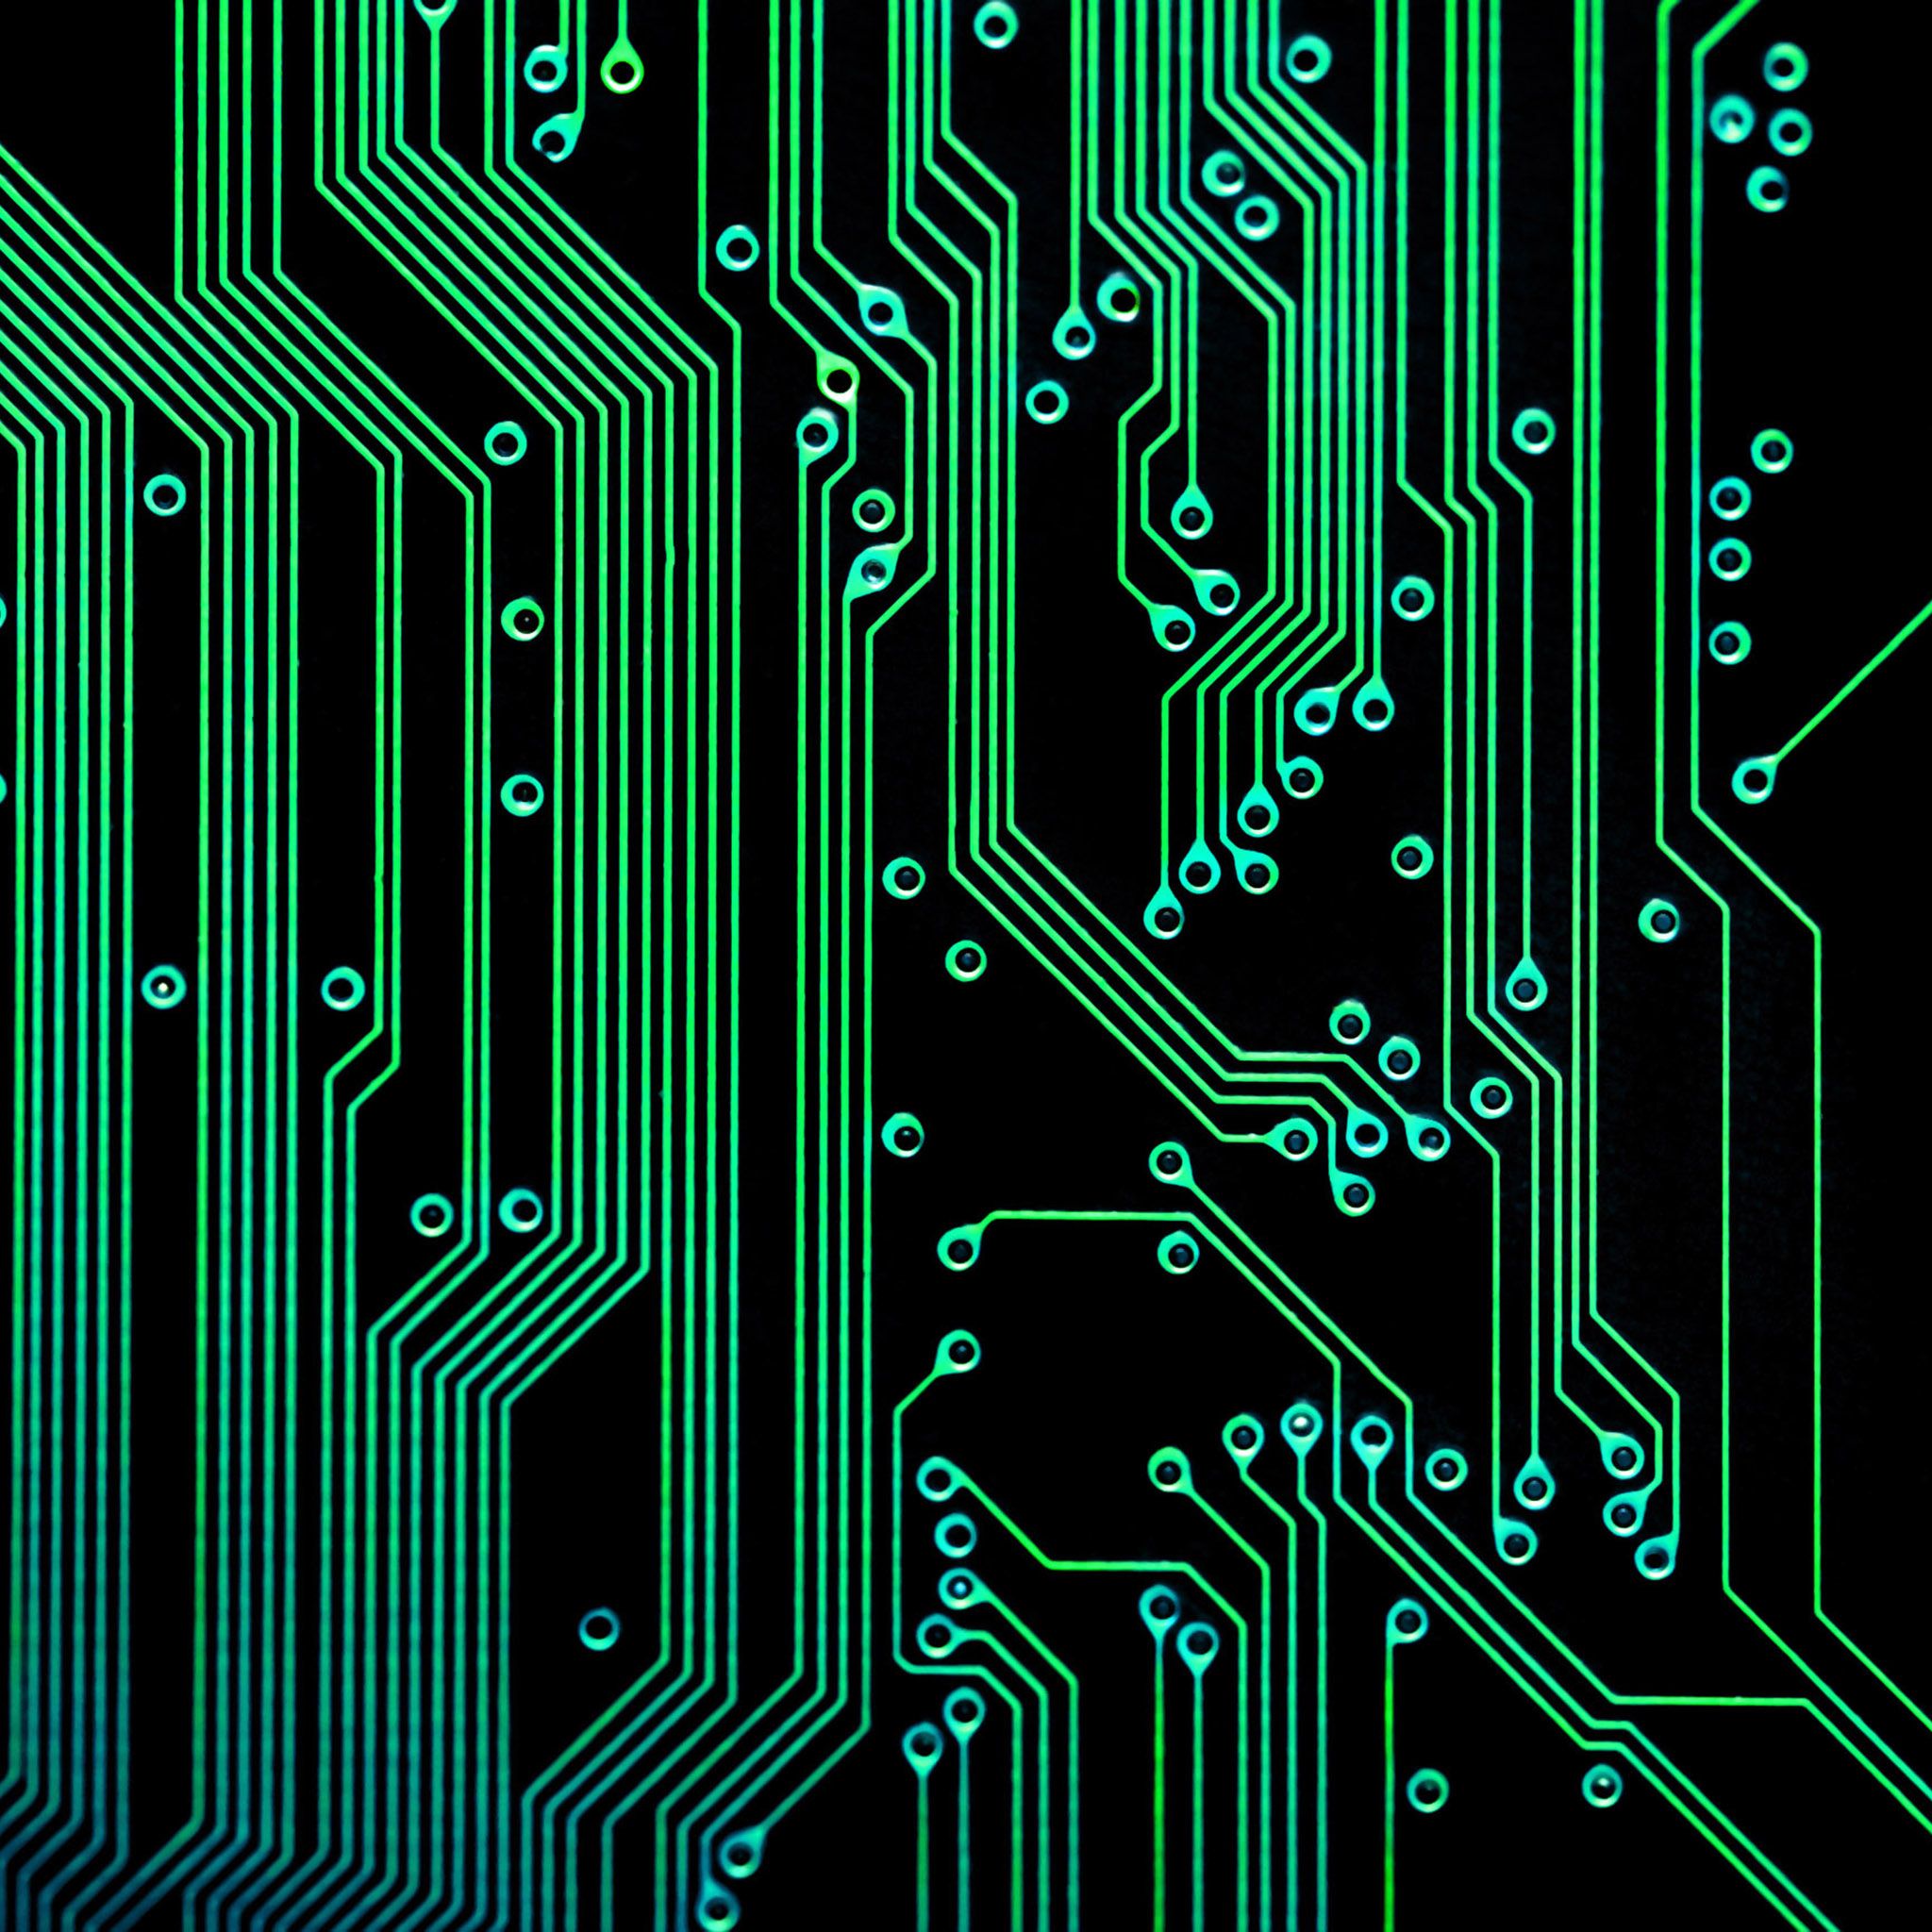 abstract circuit board design - Google Search | t21 shirt ...